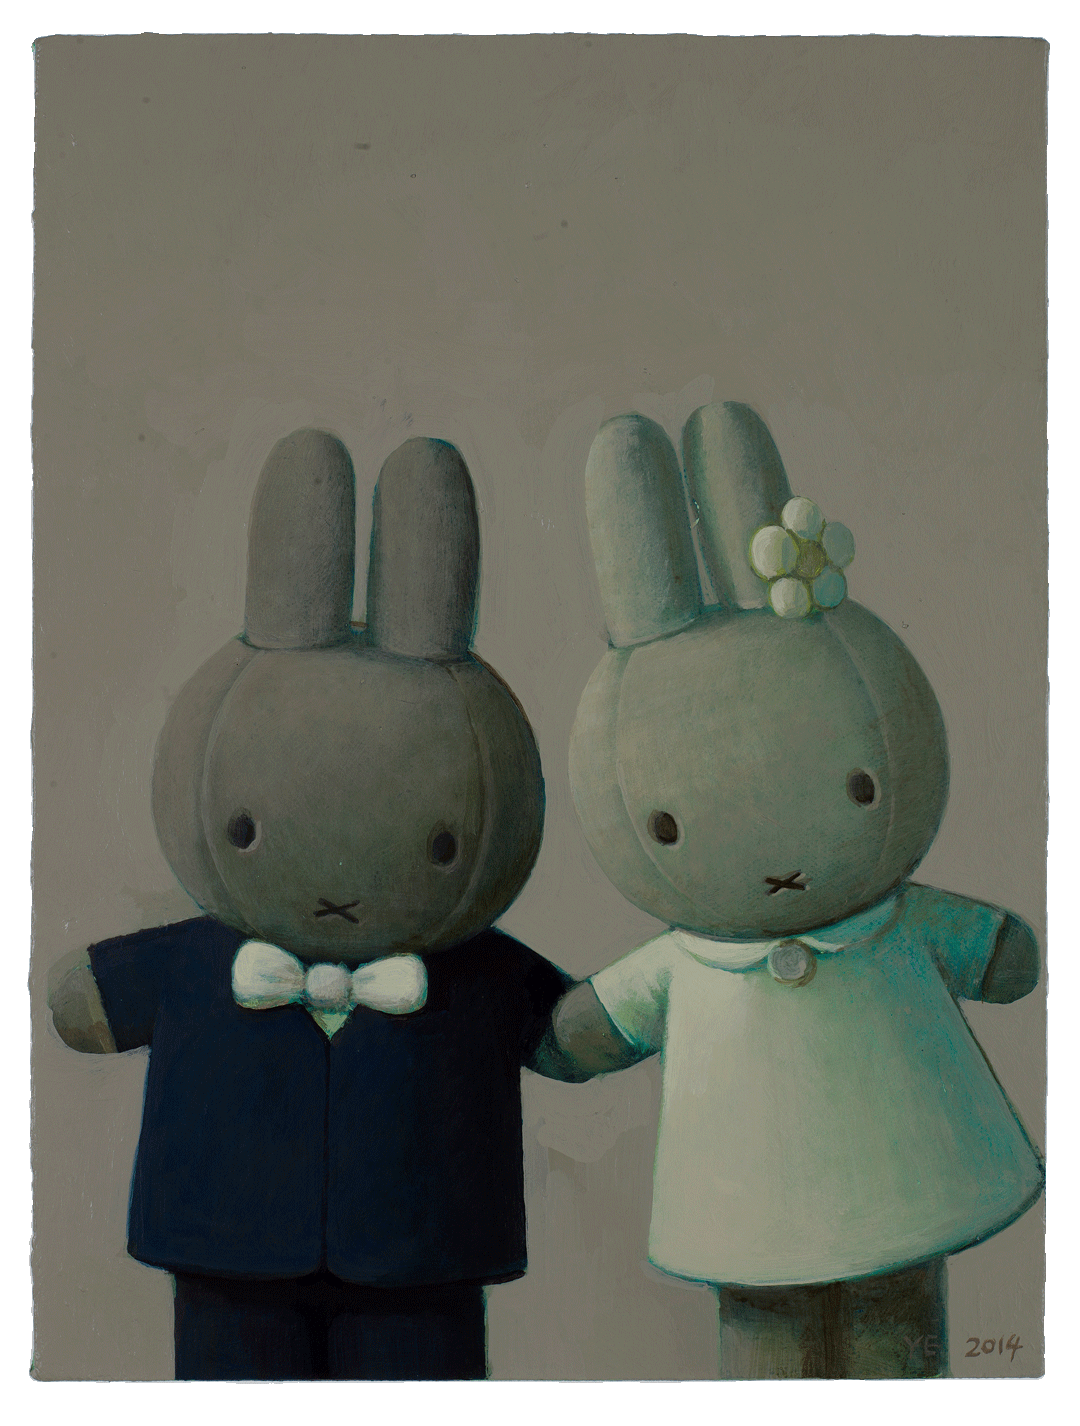 A painting by Liu Ye, titled Miffy Getting Married, dated 2014.